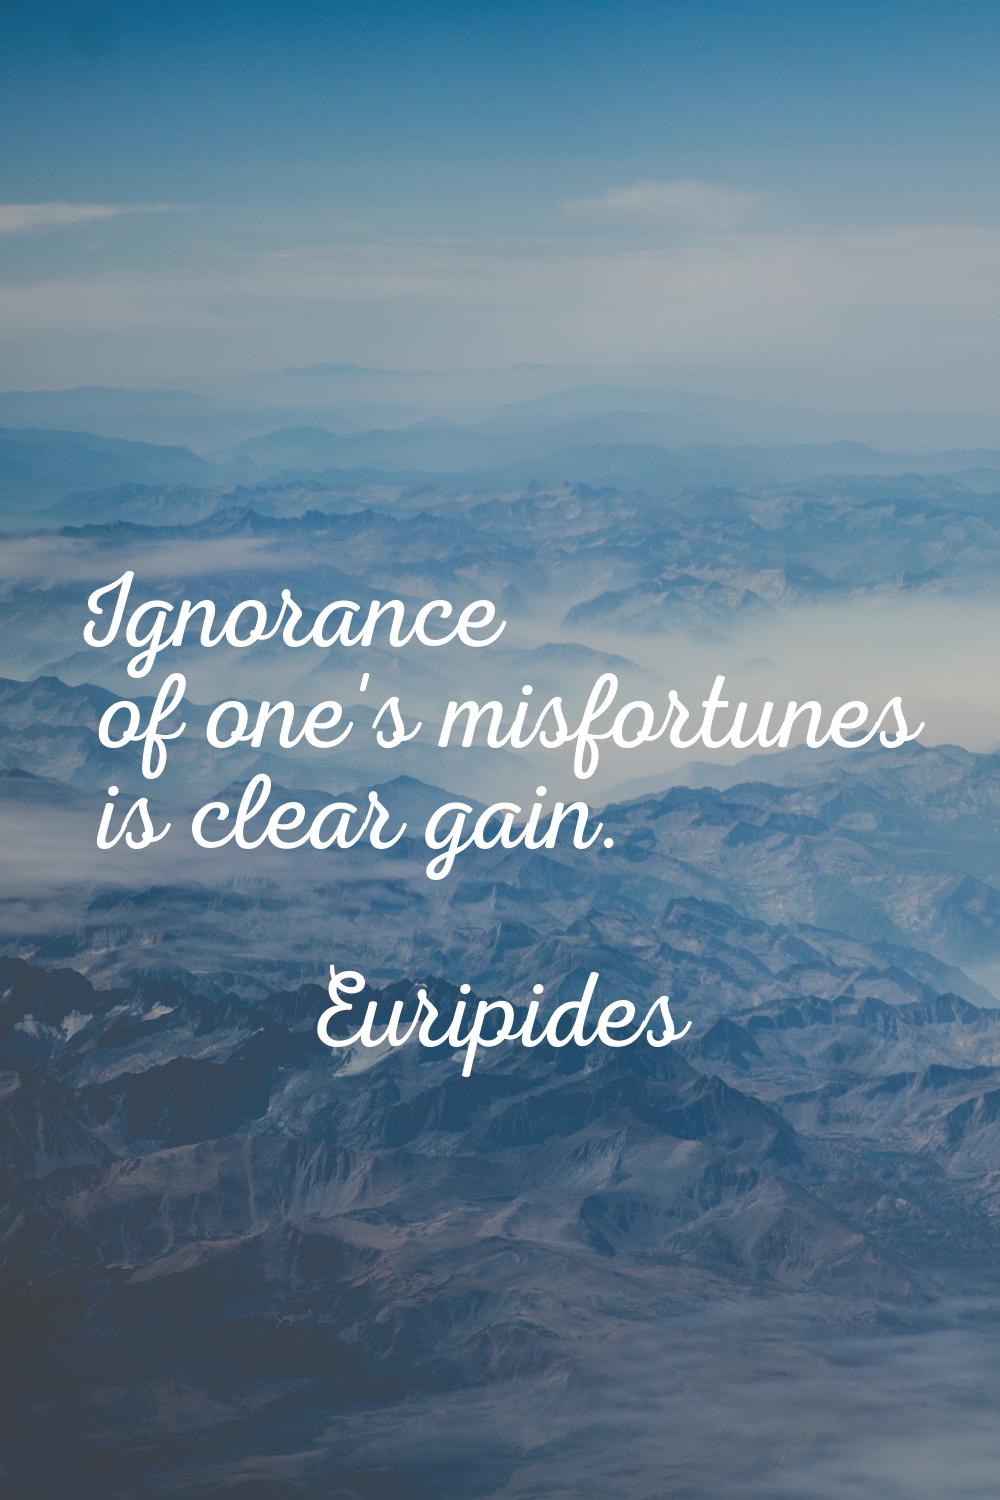 Ignorance of one's misfortunes is clear gain.